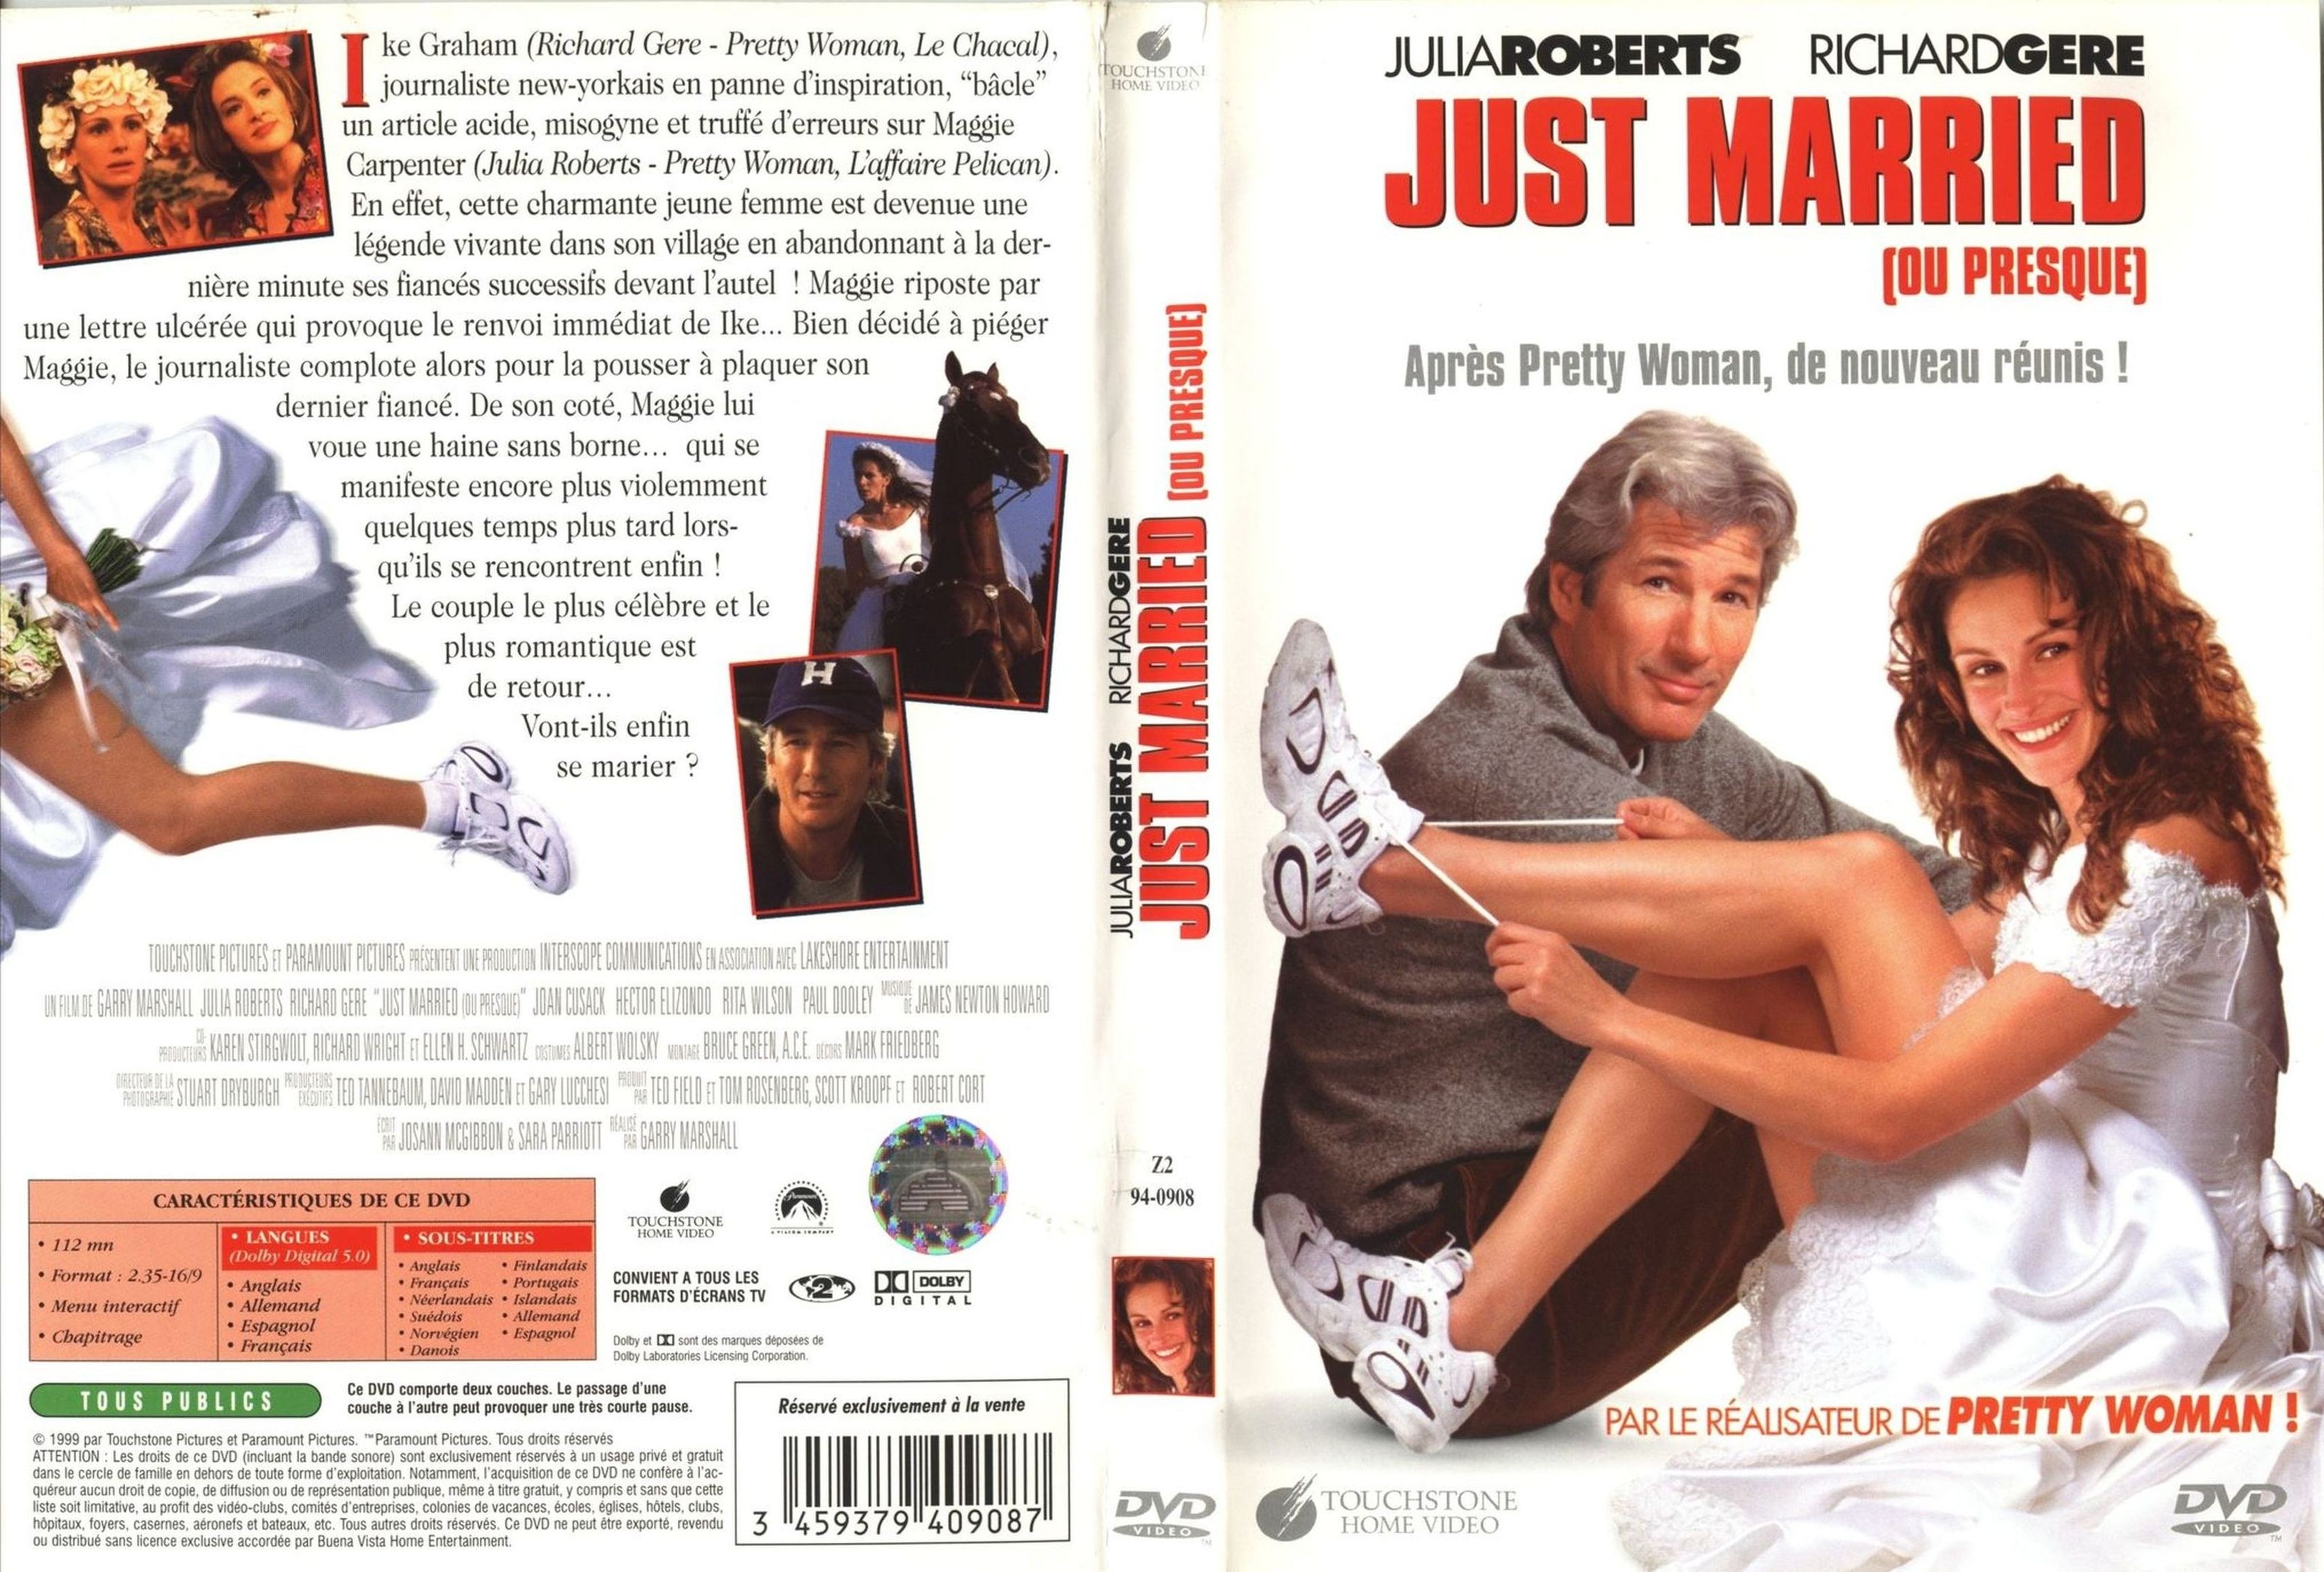 Jaquette DVD Just married